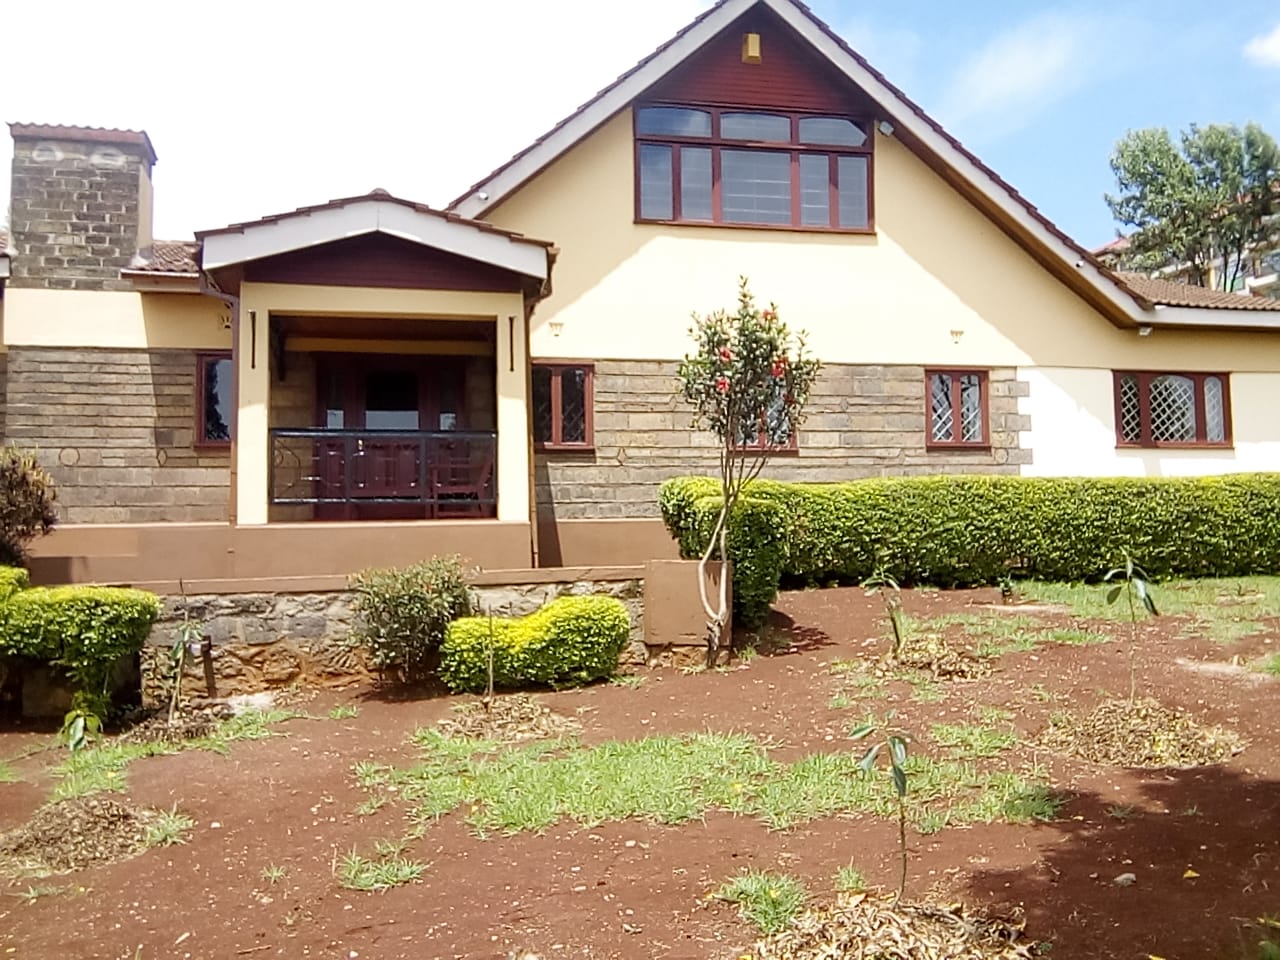 Home & Farm within Ngong town